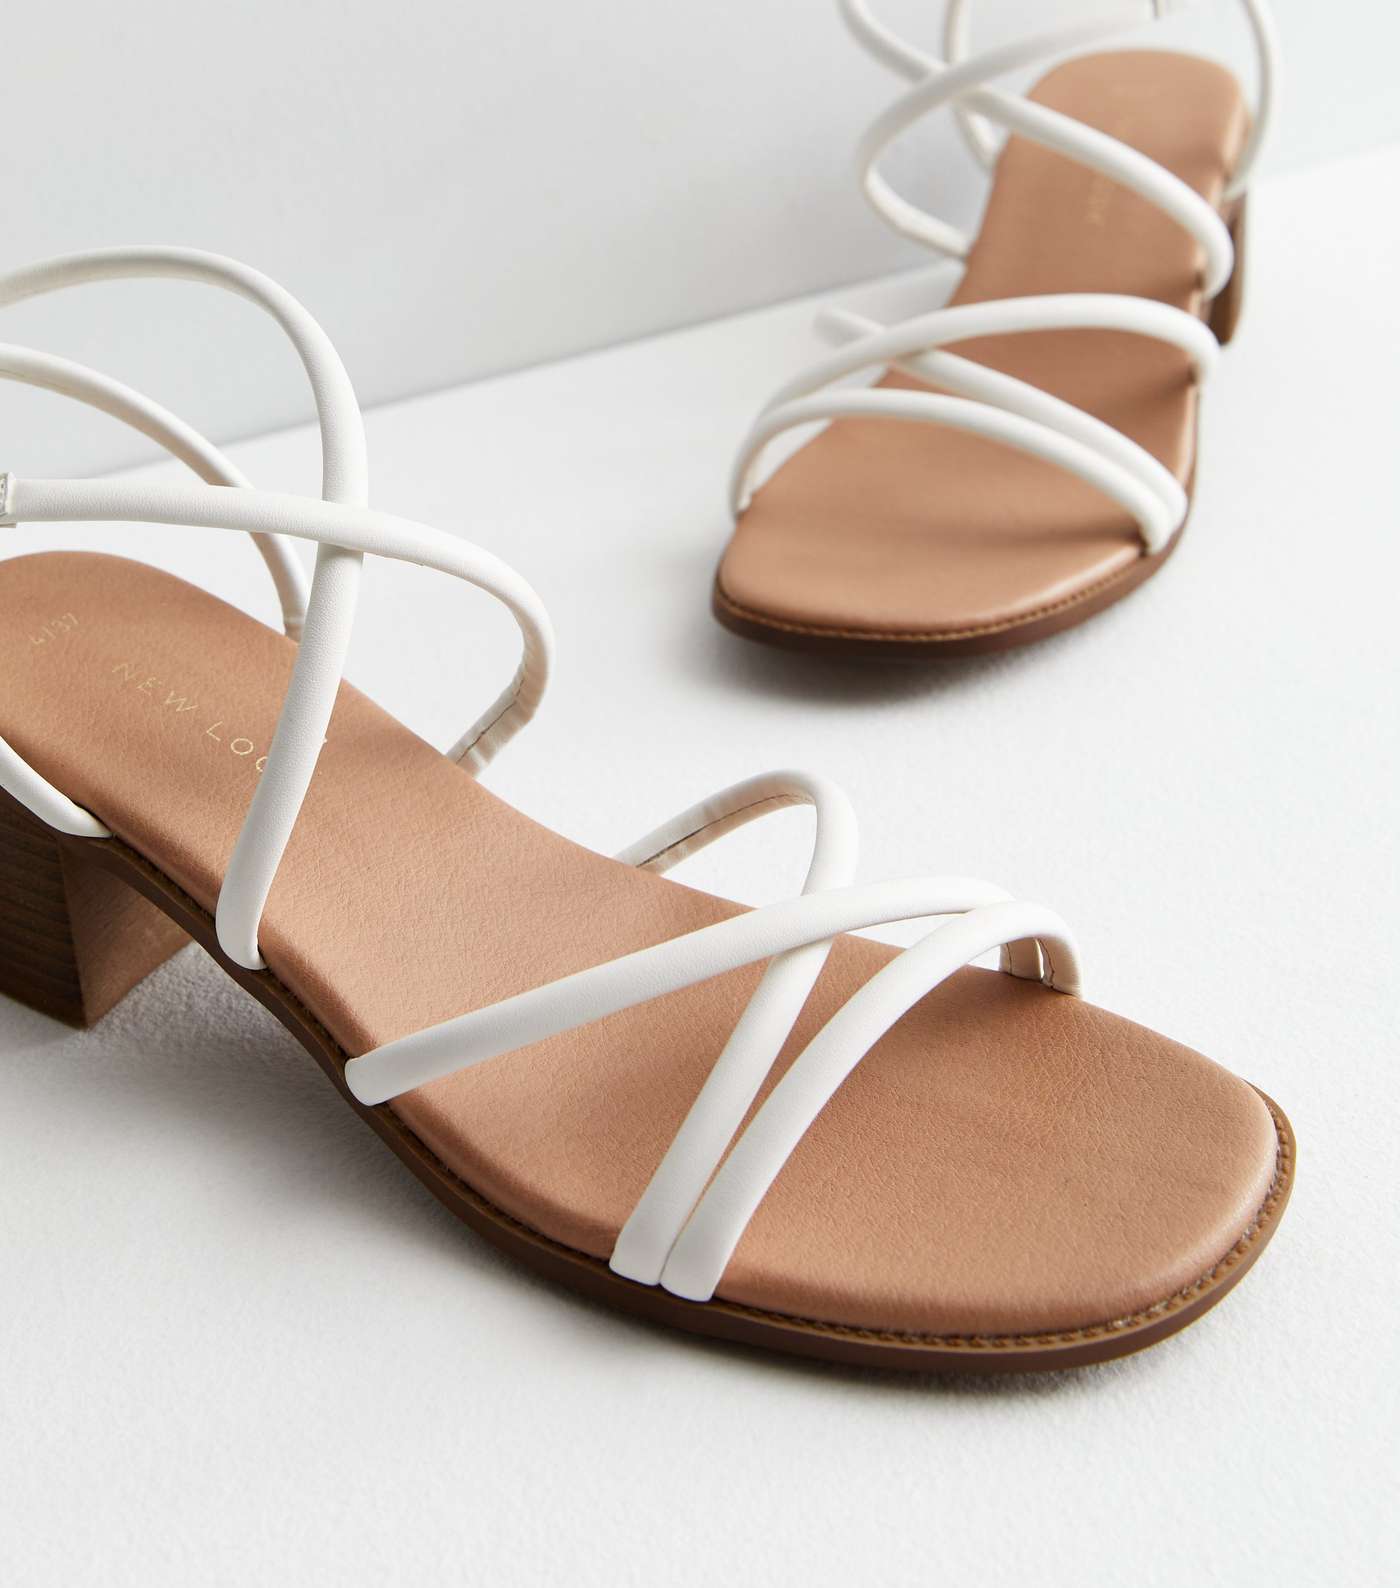 White Leather-Look Strappy Mid Block Heel Sandals Image 3